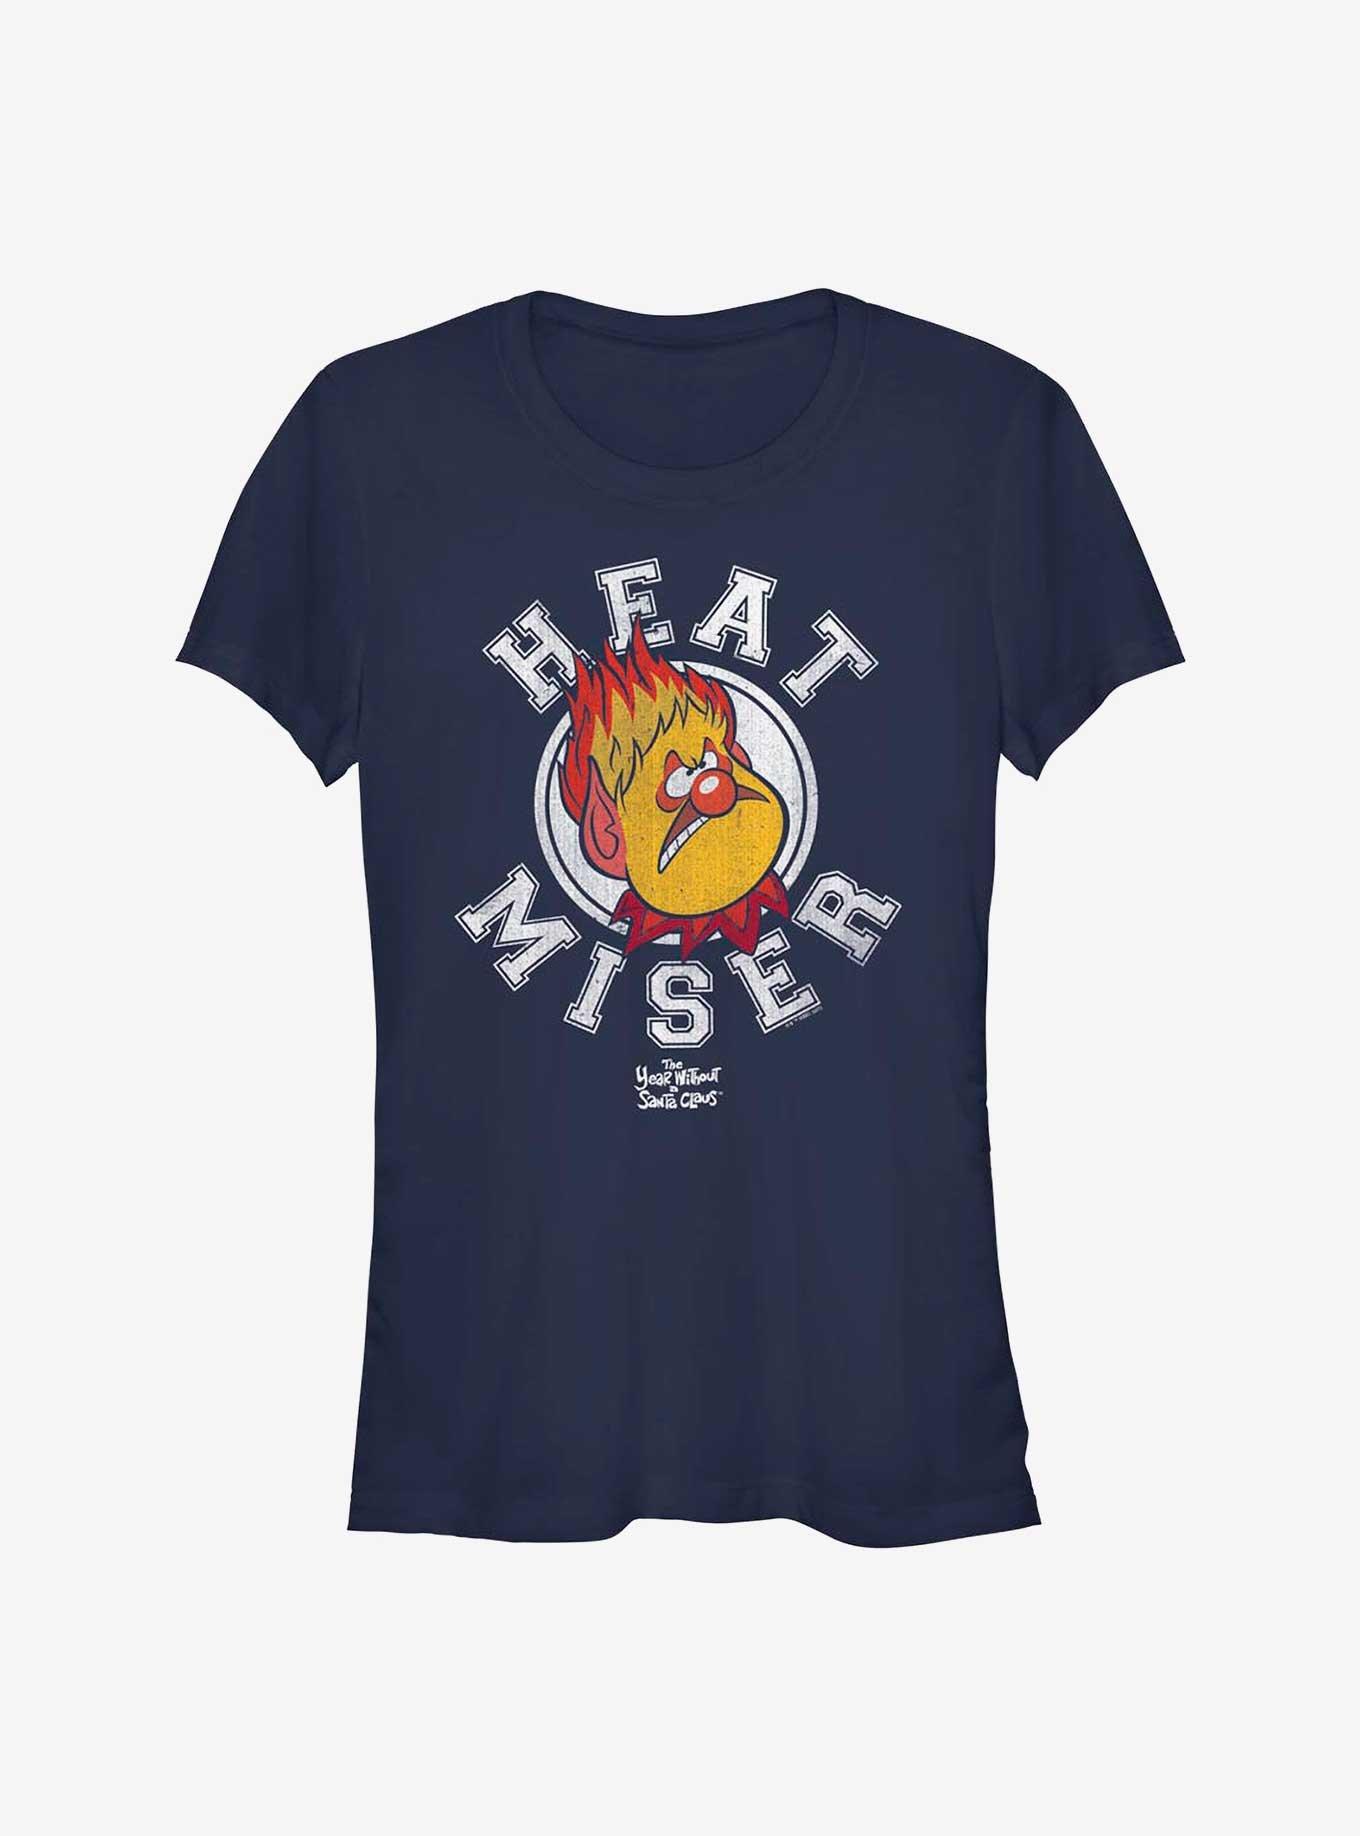 The Year Without A Santa Claus Heat Miser Badge Girls T-Shirt, NAVY, hi-res